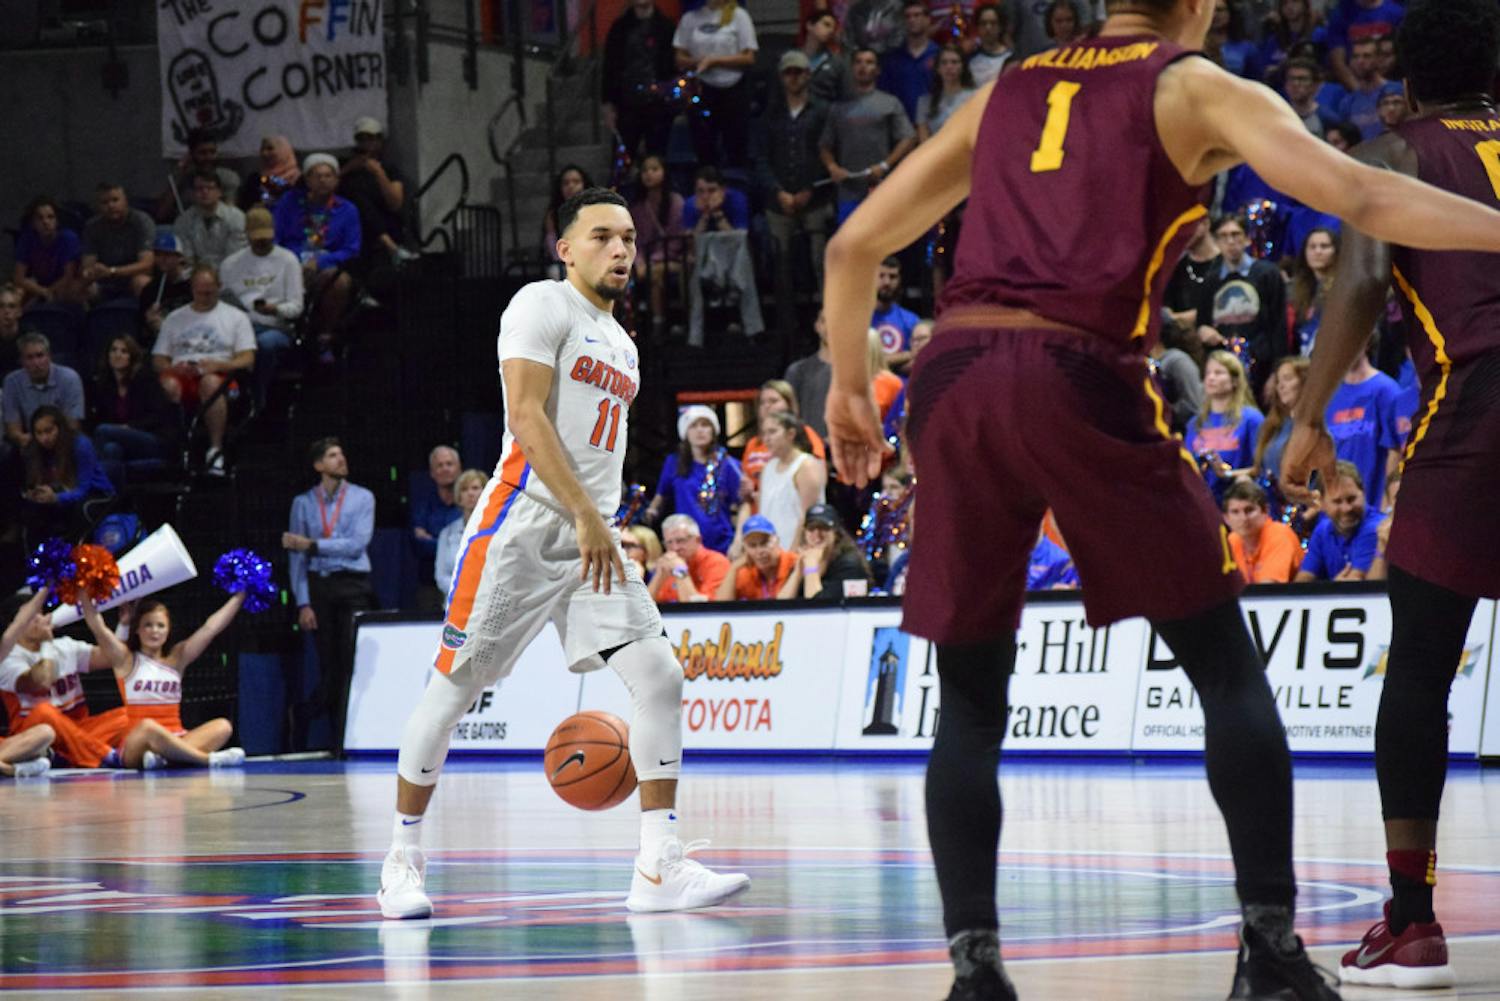 Florida guard Chris Chiozza scored 17 points in Florida’s 81-74 win over Vanderbilt on Saturday to open SEC play.